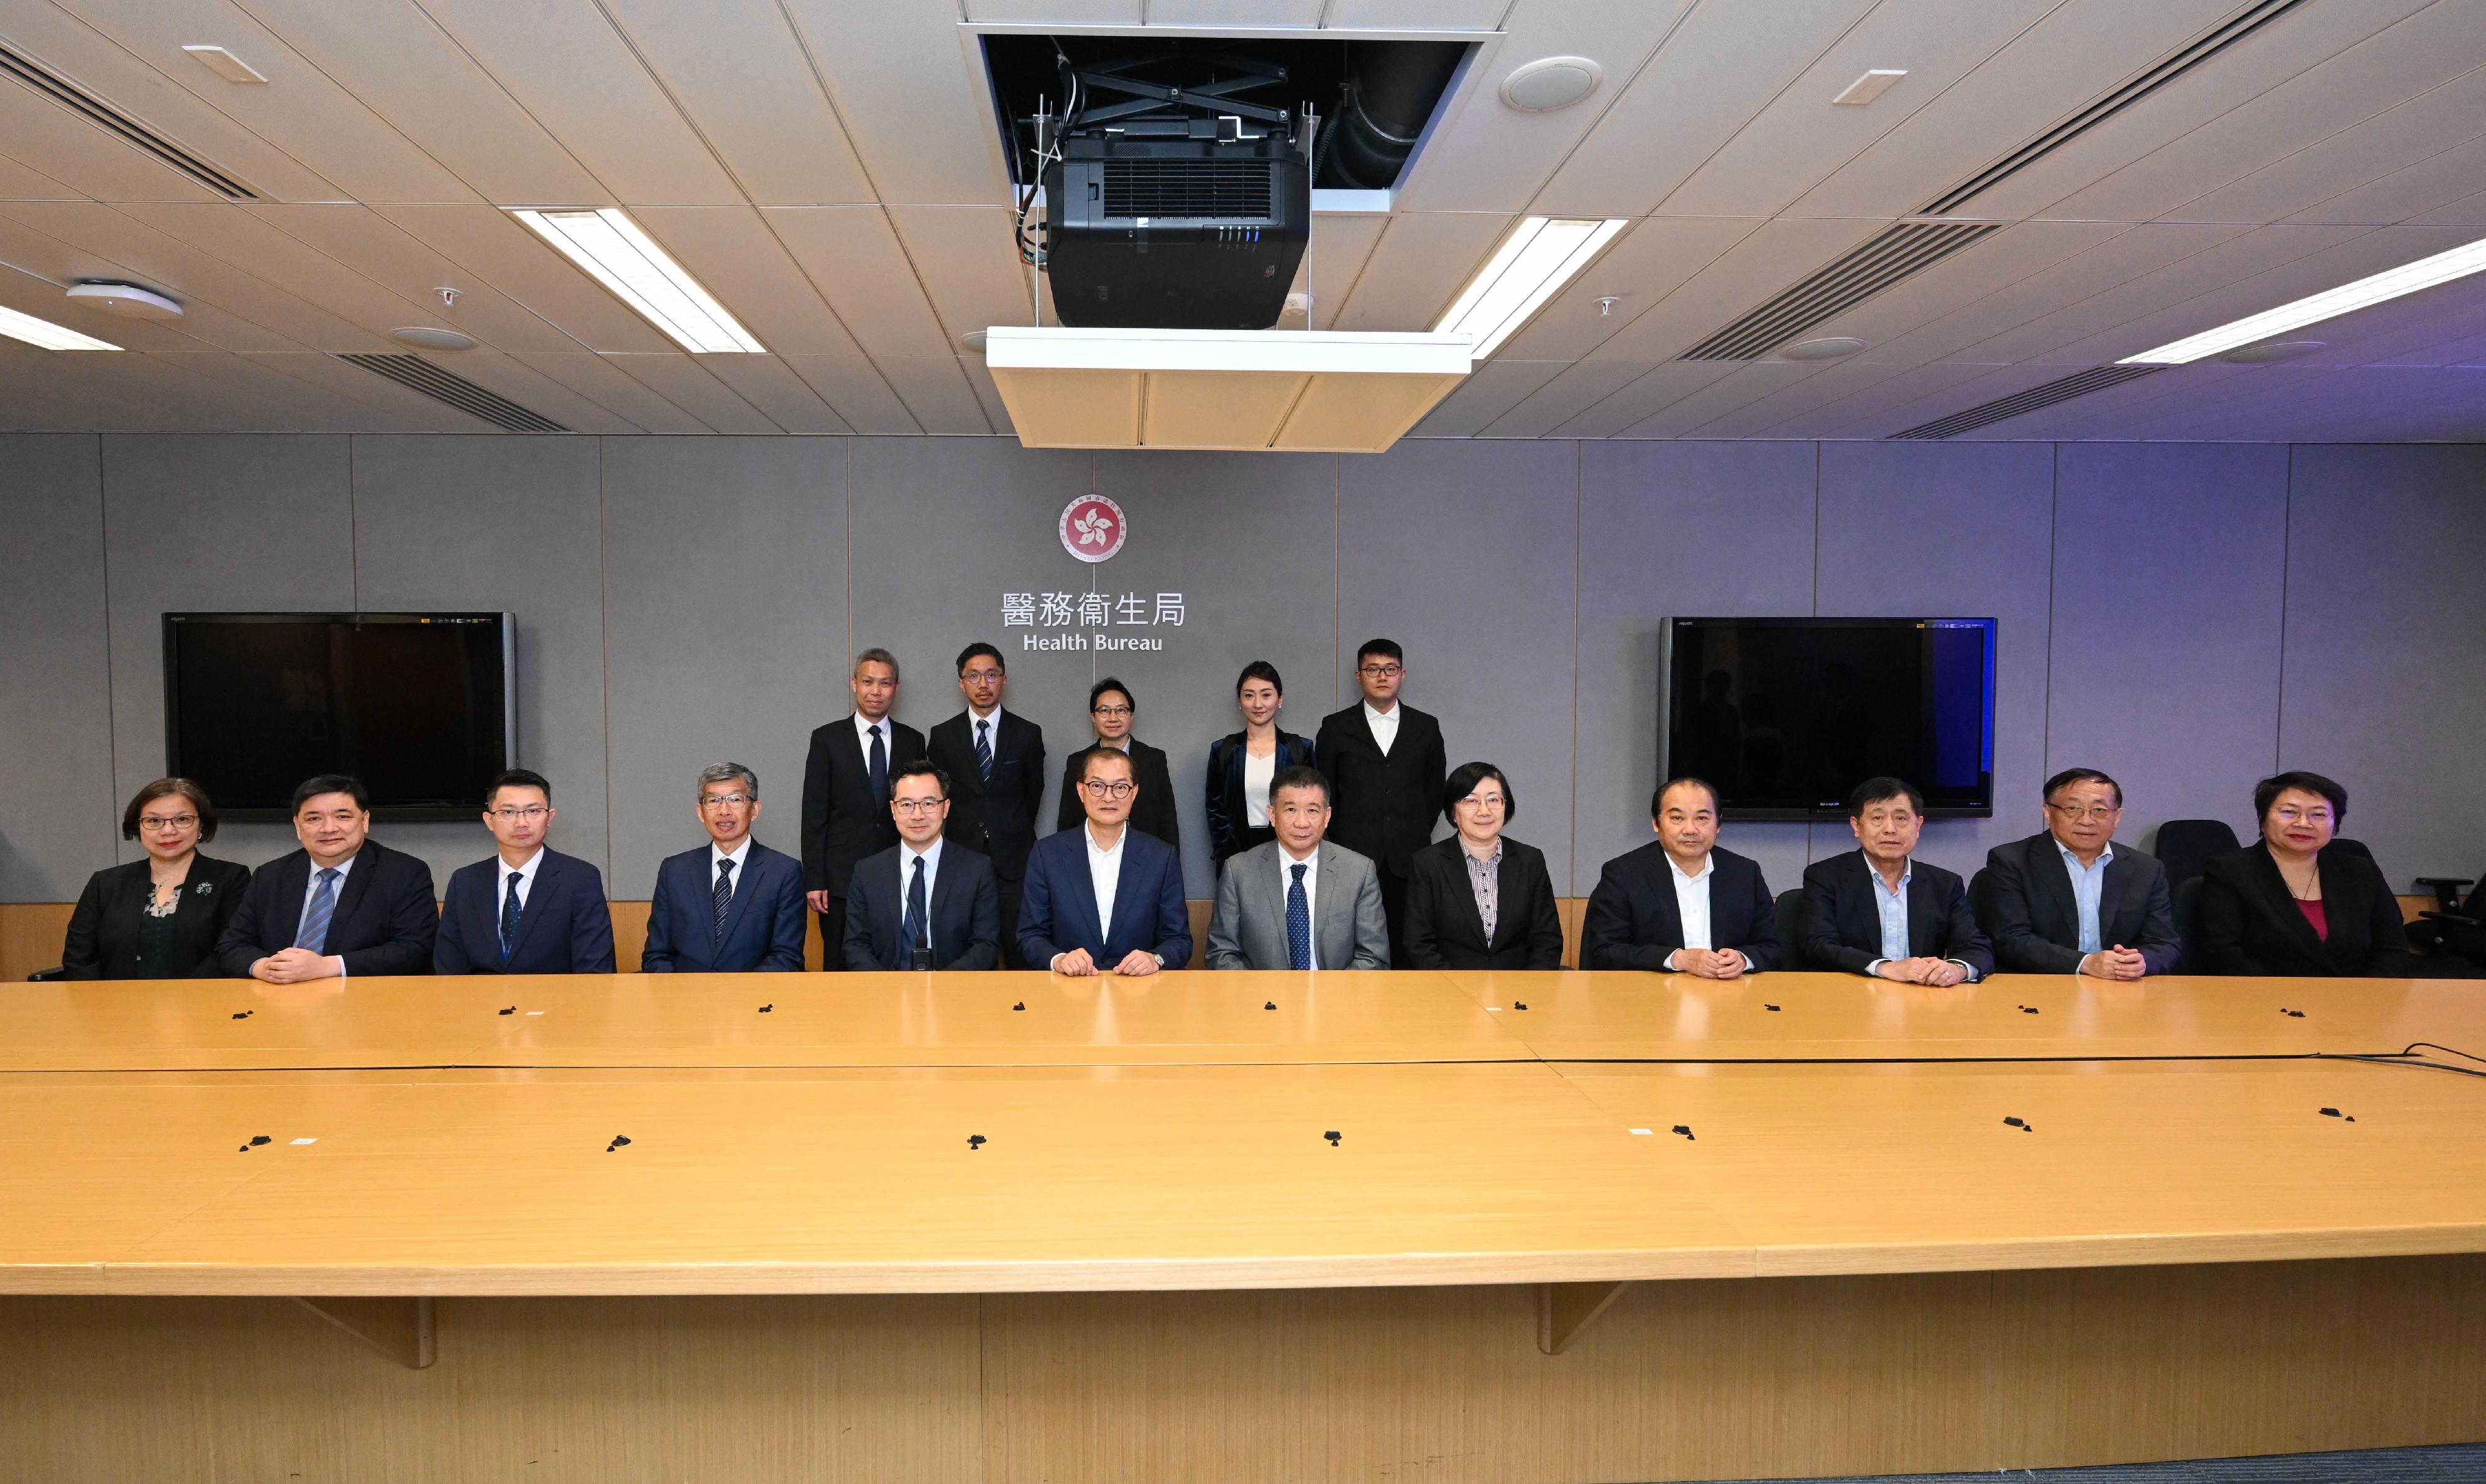 The Secretary for Health, Professor Lo Chung-mau, met with a delegation led by the President of the Guangdong Province Hospital Association, Professor Huang Li, today (January 16). Photo shows Professor Lo (front row, sixth left); Professor Huang (front row, sixth right); Deputy Secretary for Health Mr Eddie Lee (front row, fifth left); the Senior Advisor (Secretary for Health's Office), Dr Joe Fan (front row, third left); the Director of Cluster Services of the Hospital Authority, Dr Simon Tang (front row, fourth left), and other attendees of the meeting.